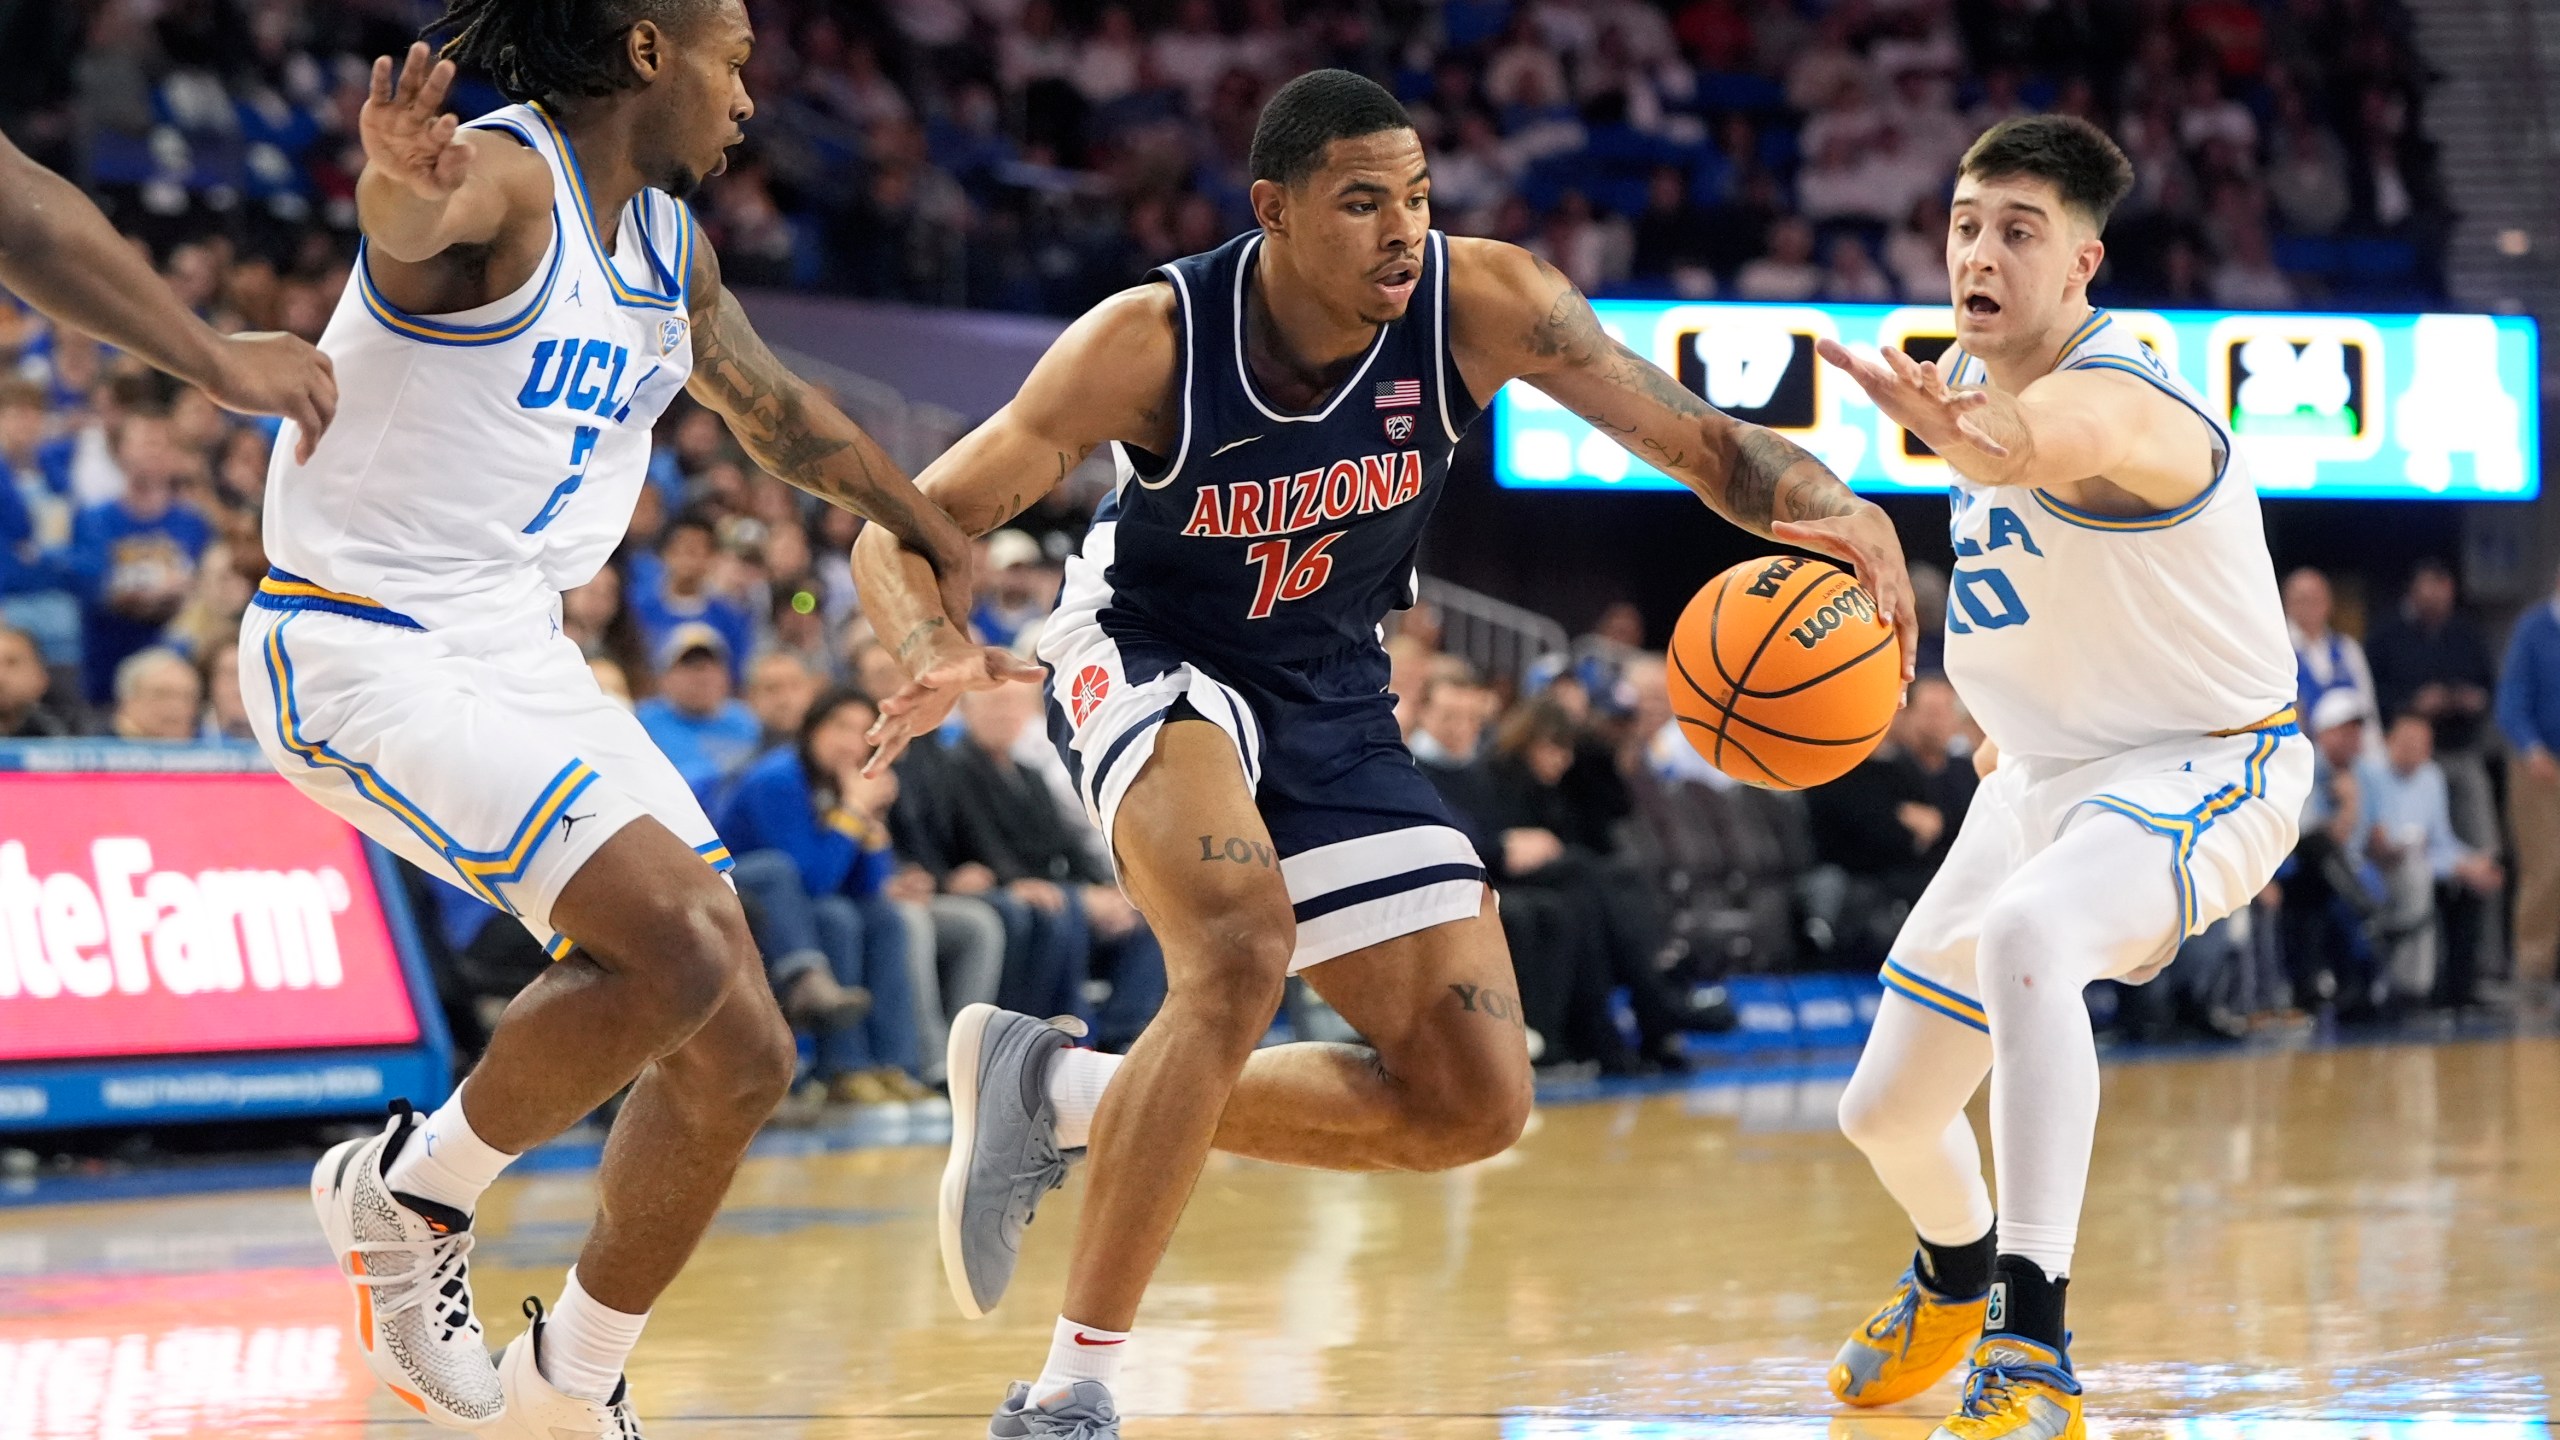 Arizona's Keshad Johnson (16) dribbles under pressure by UCLA guard Dylan Andrews (2) and Lazar Stefanovic (10) during the first half of an NCAA college basketball game in Los Angeles, Thursday, March 7, 2024. (AP Photo/Jae C. Hong)